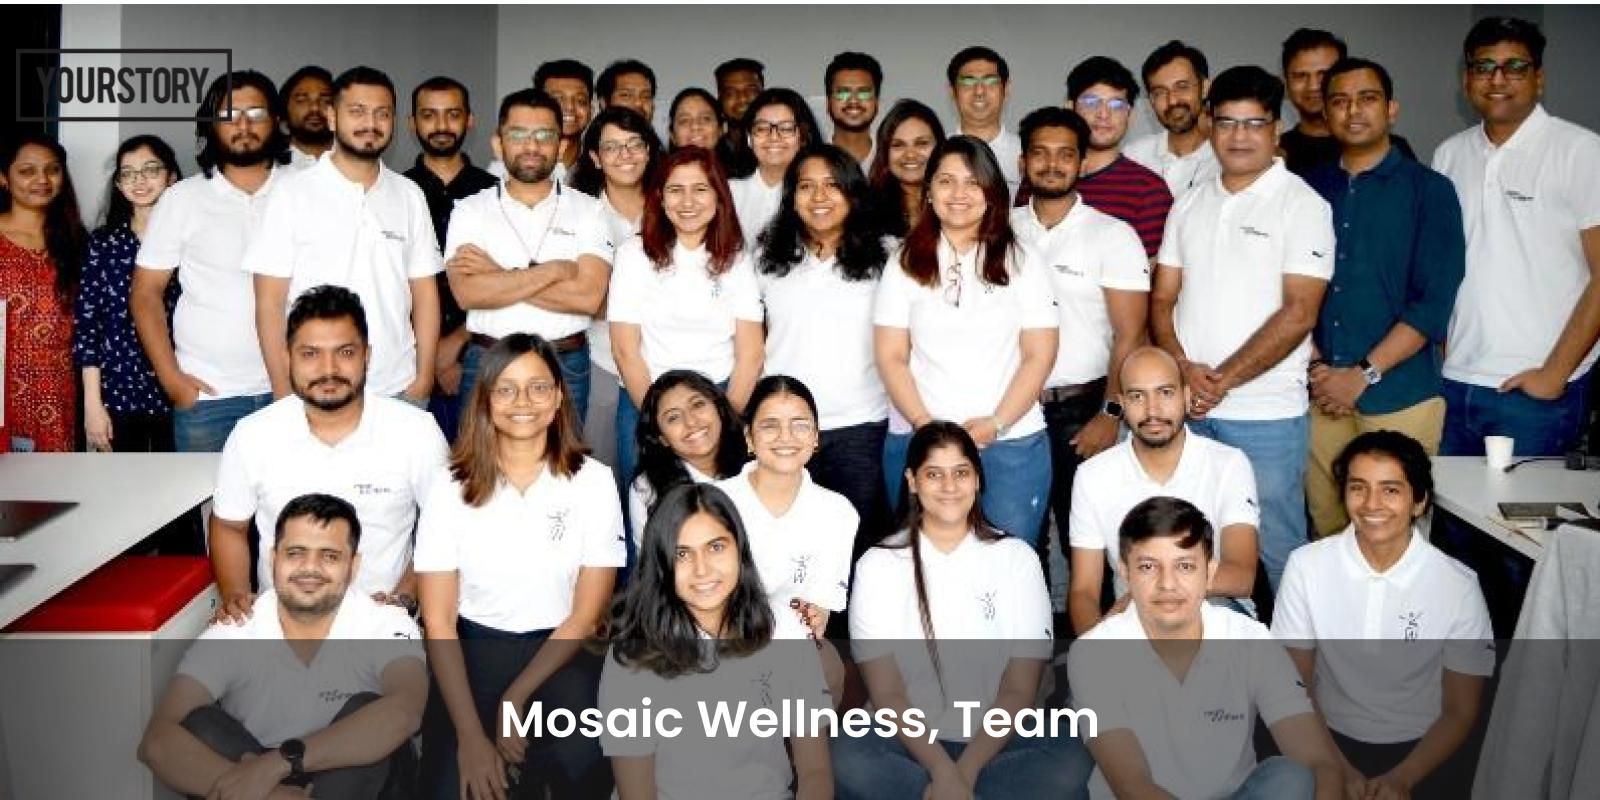 [Funding alert] Mosaic Wellness raises $24M Series A investment led by Sequoia